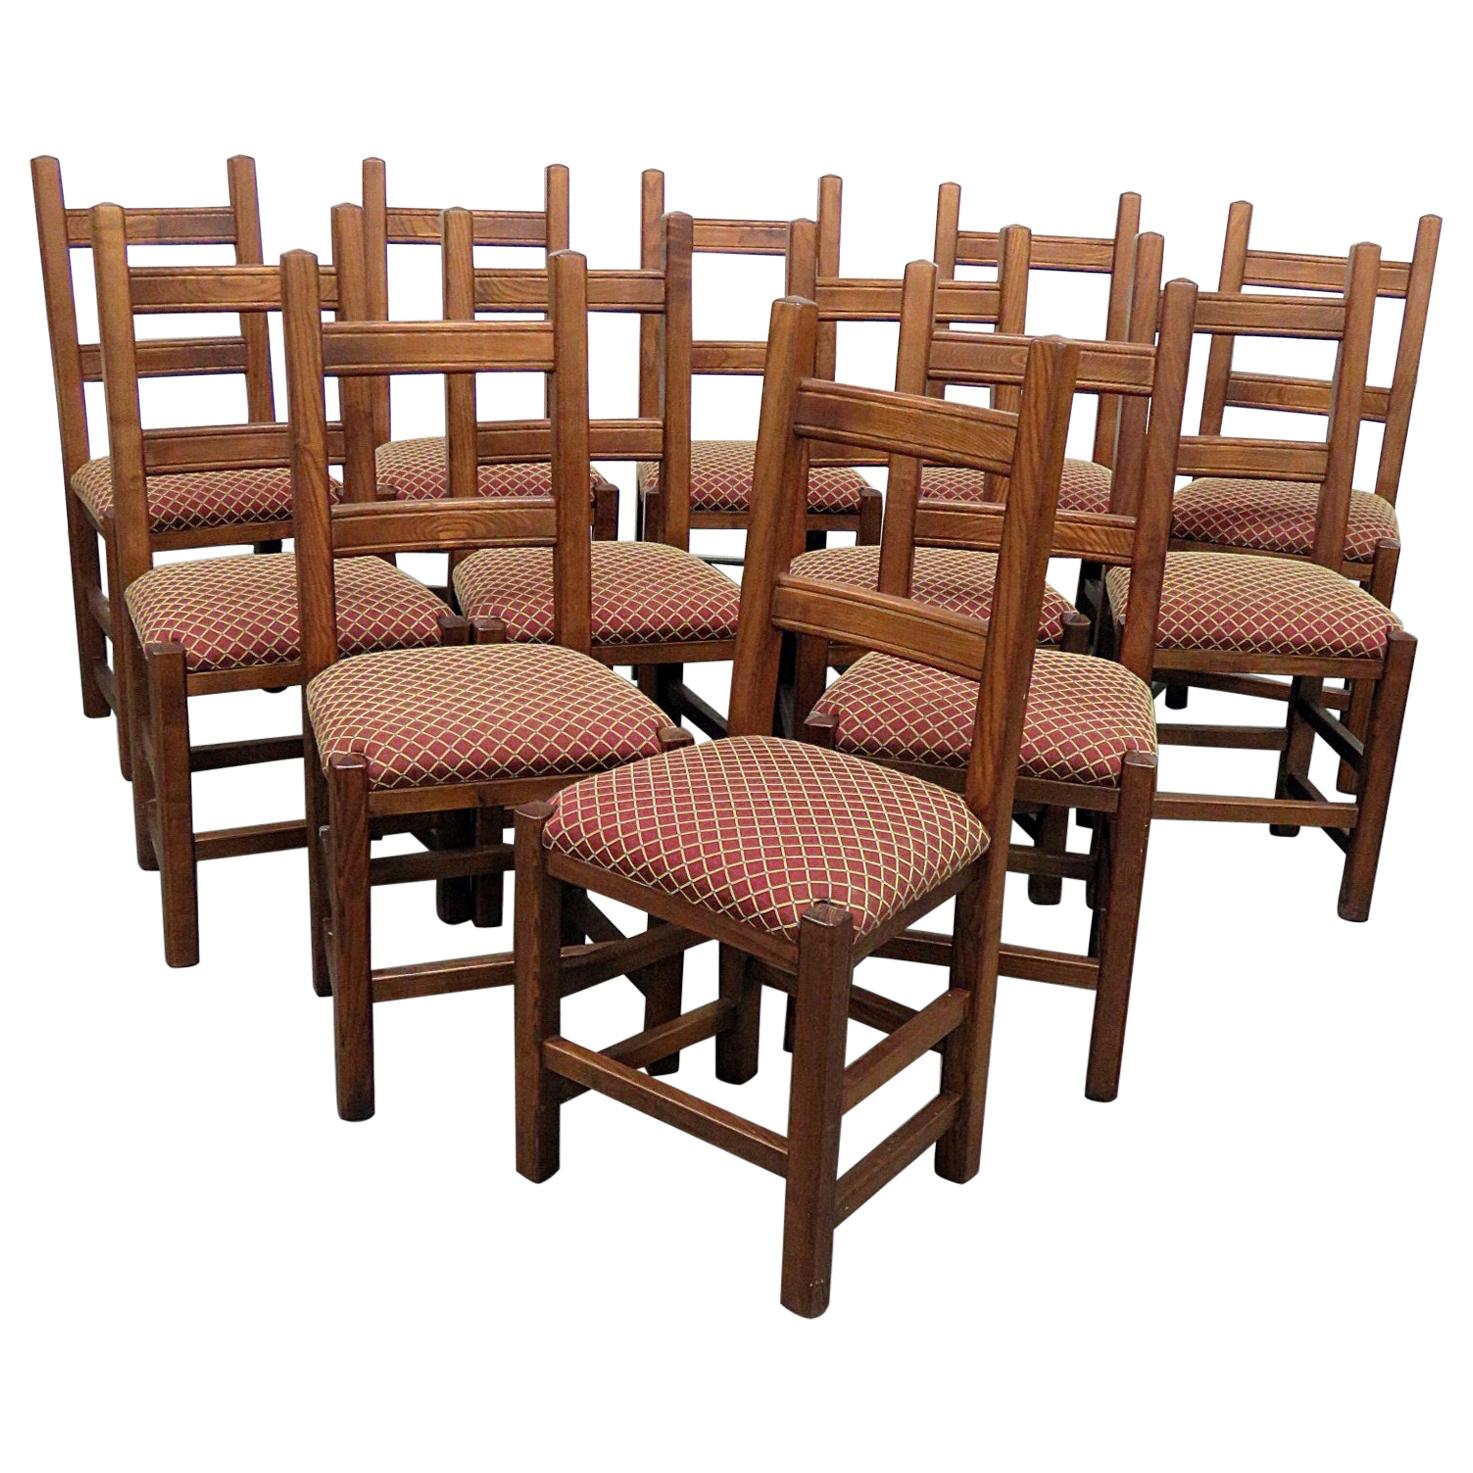 Set of 12 Stickley Style Dining Side Chairs